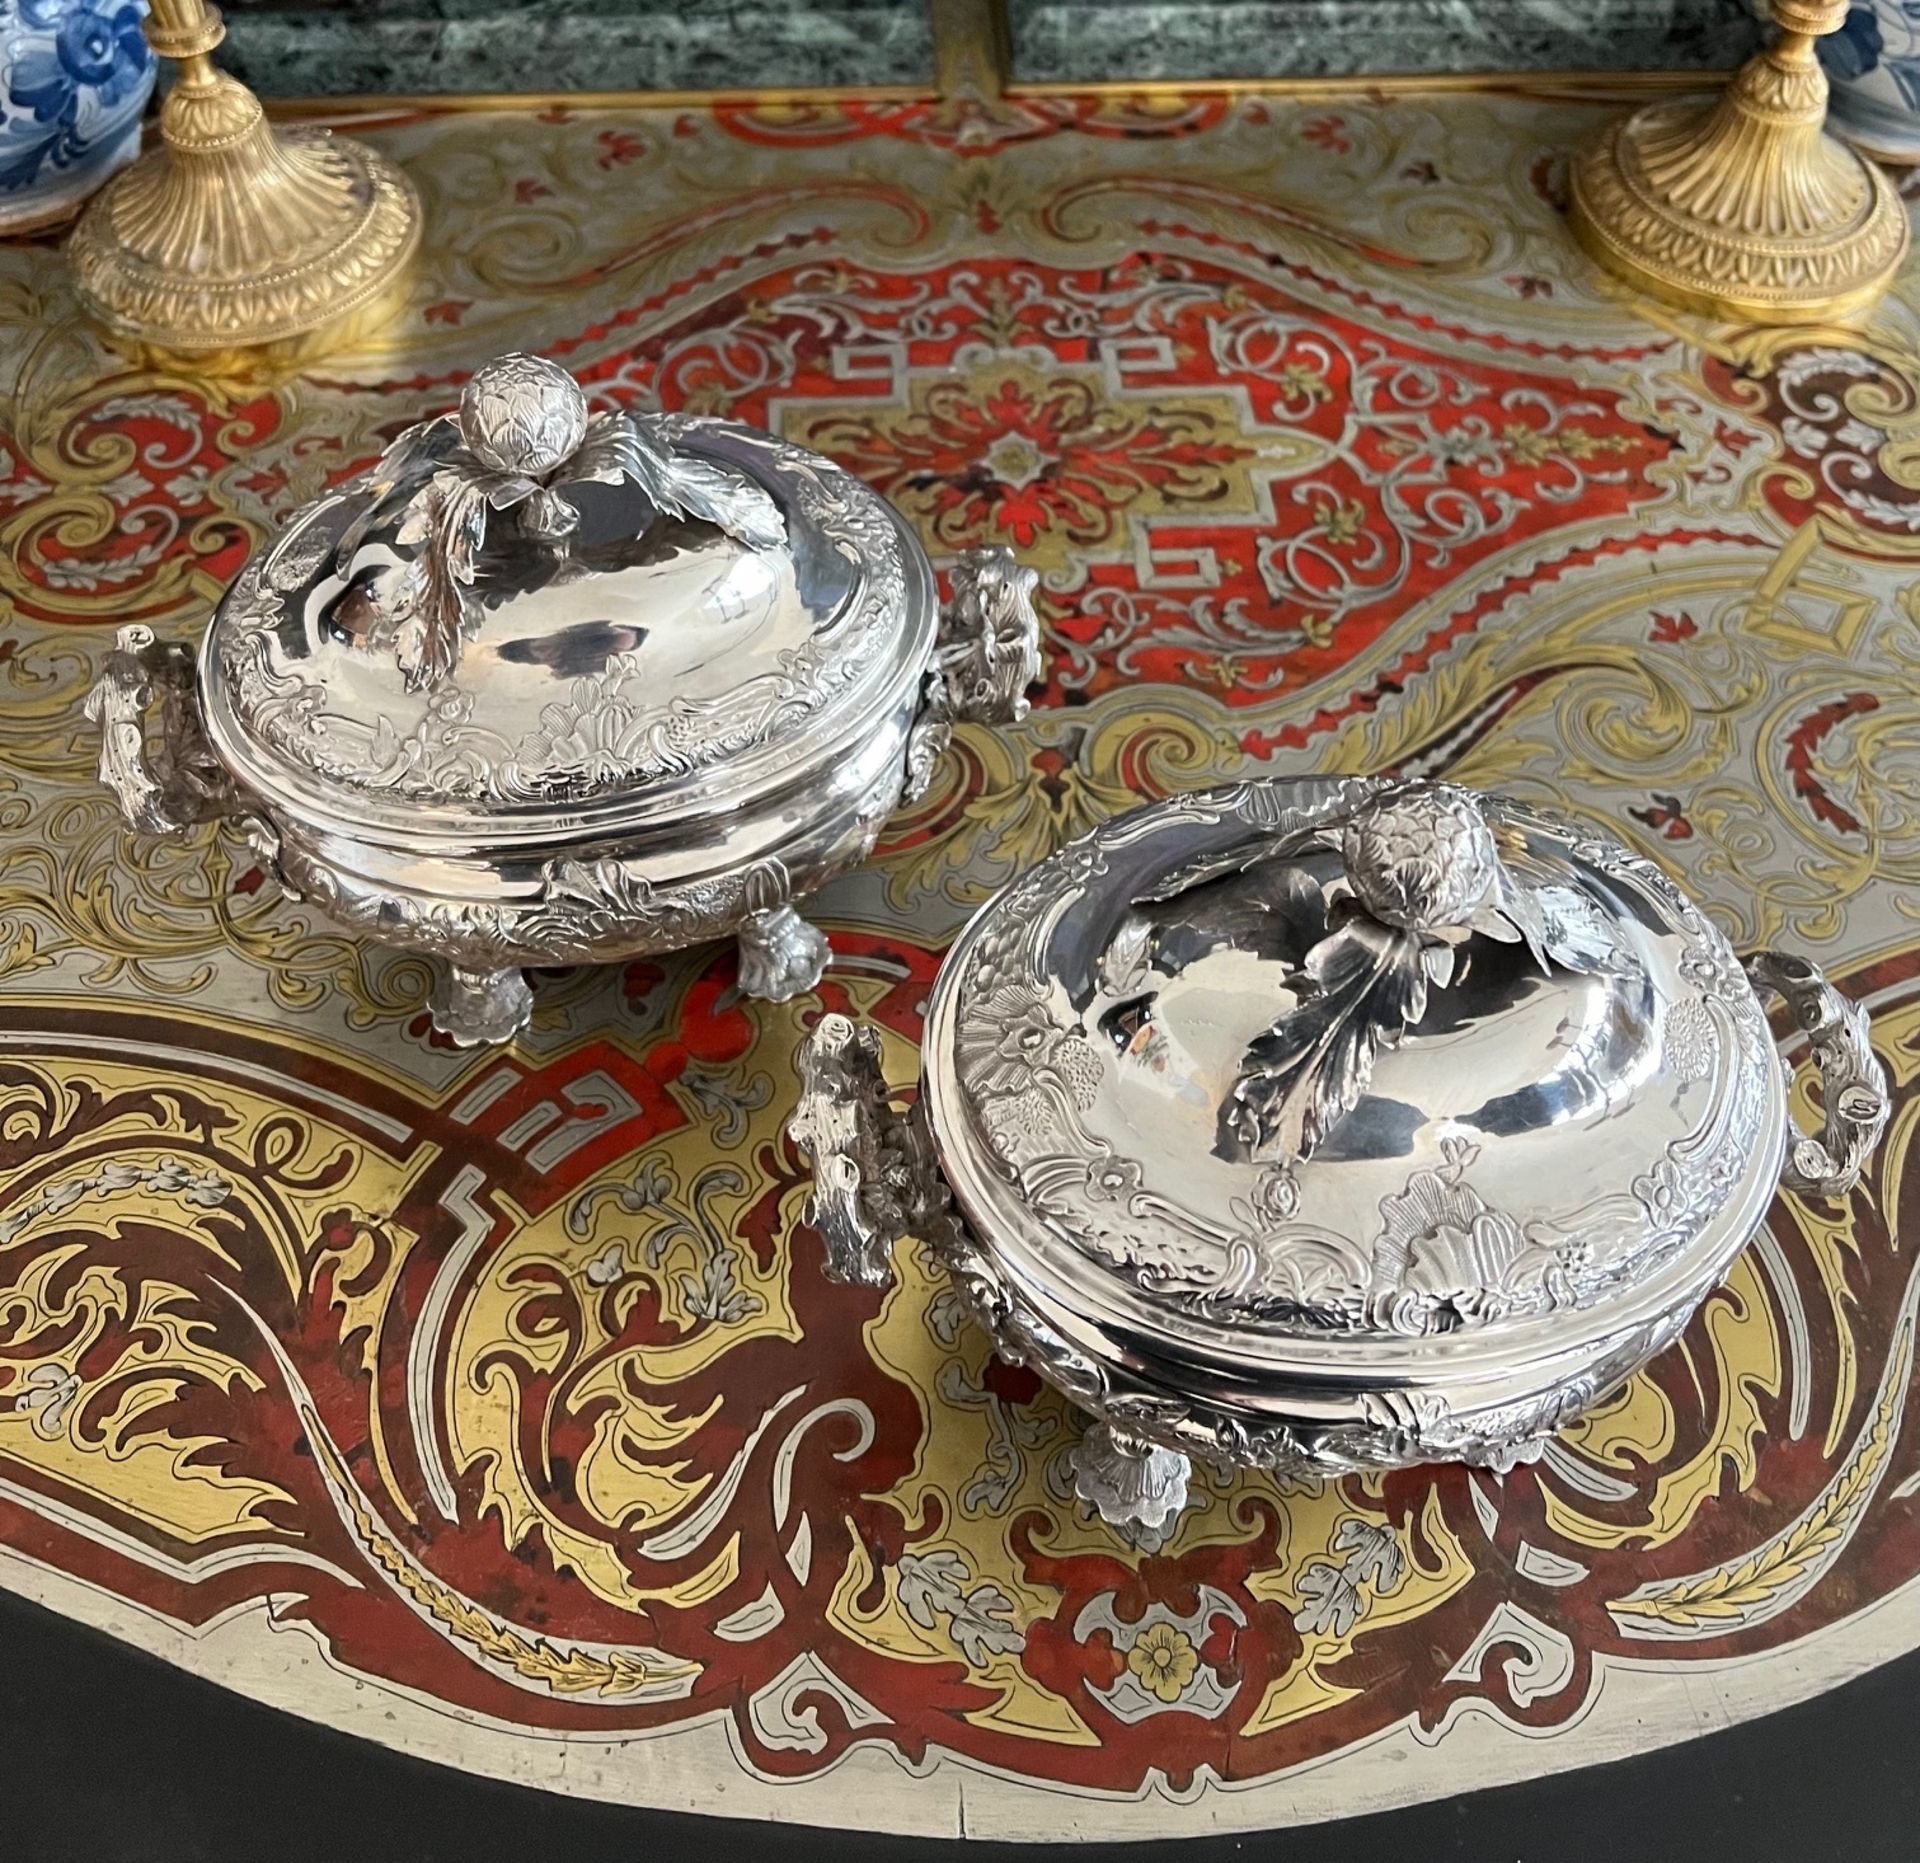 A FINE PAIR OF 18TH CENTURY STERLING SILVER SAUCE TUREENS, LONDON, 1790, WILLIAM PITTS - Image 2 of 19